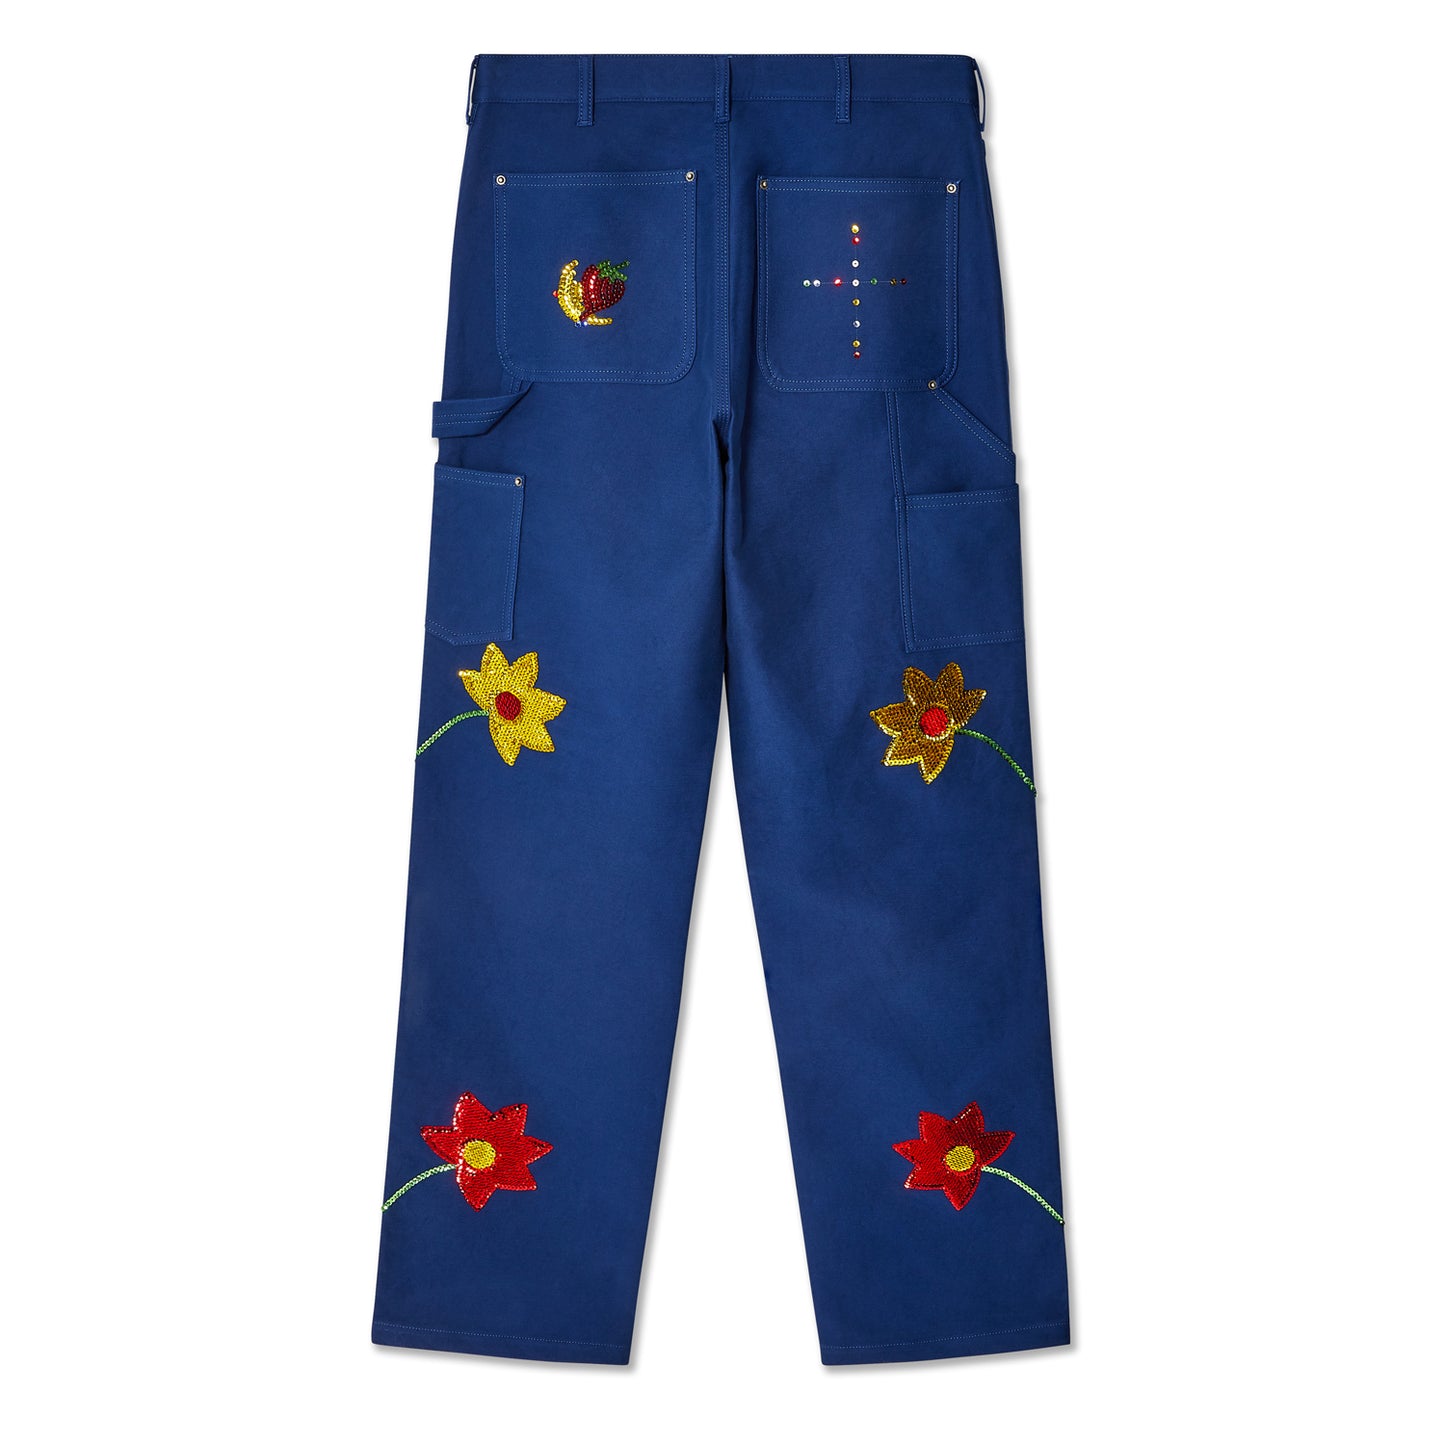 SEQUIN EMBROIDERED FLOWERS WORKWEAR DENIM DOUBLE KNEE PANTS